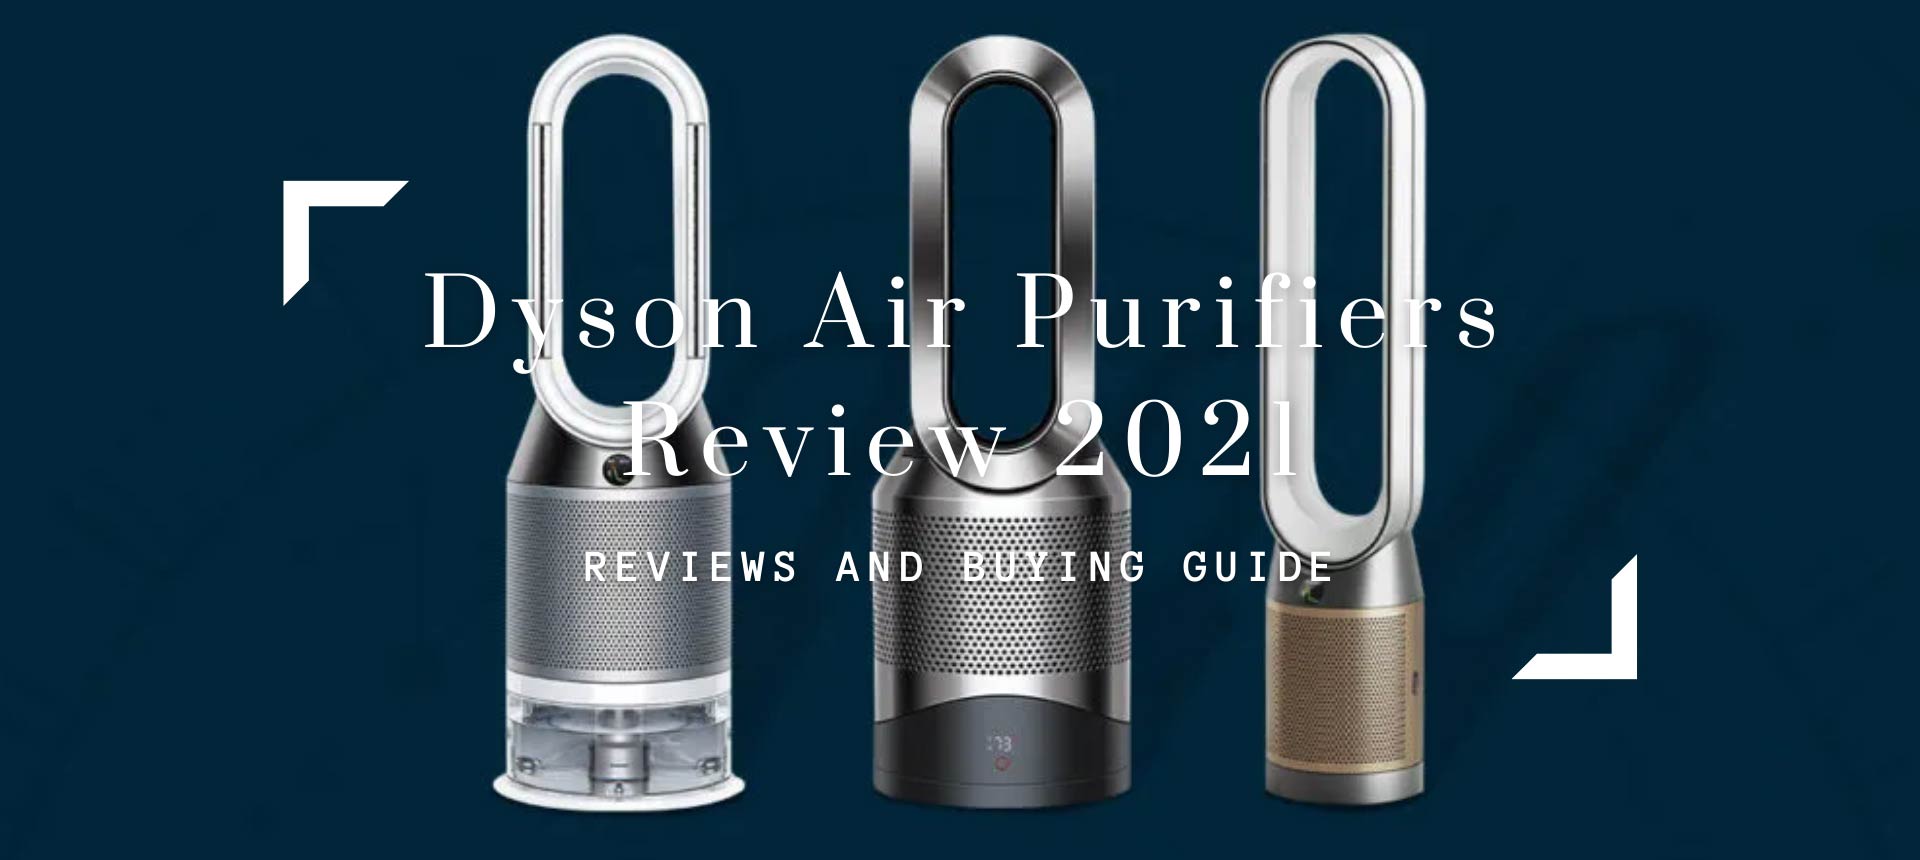 Dyson Air Purifiers Review 2021-Top Picks, Pros & Cons